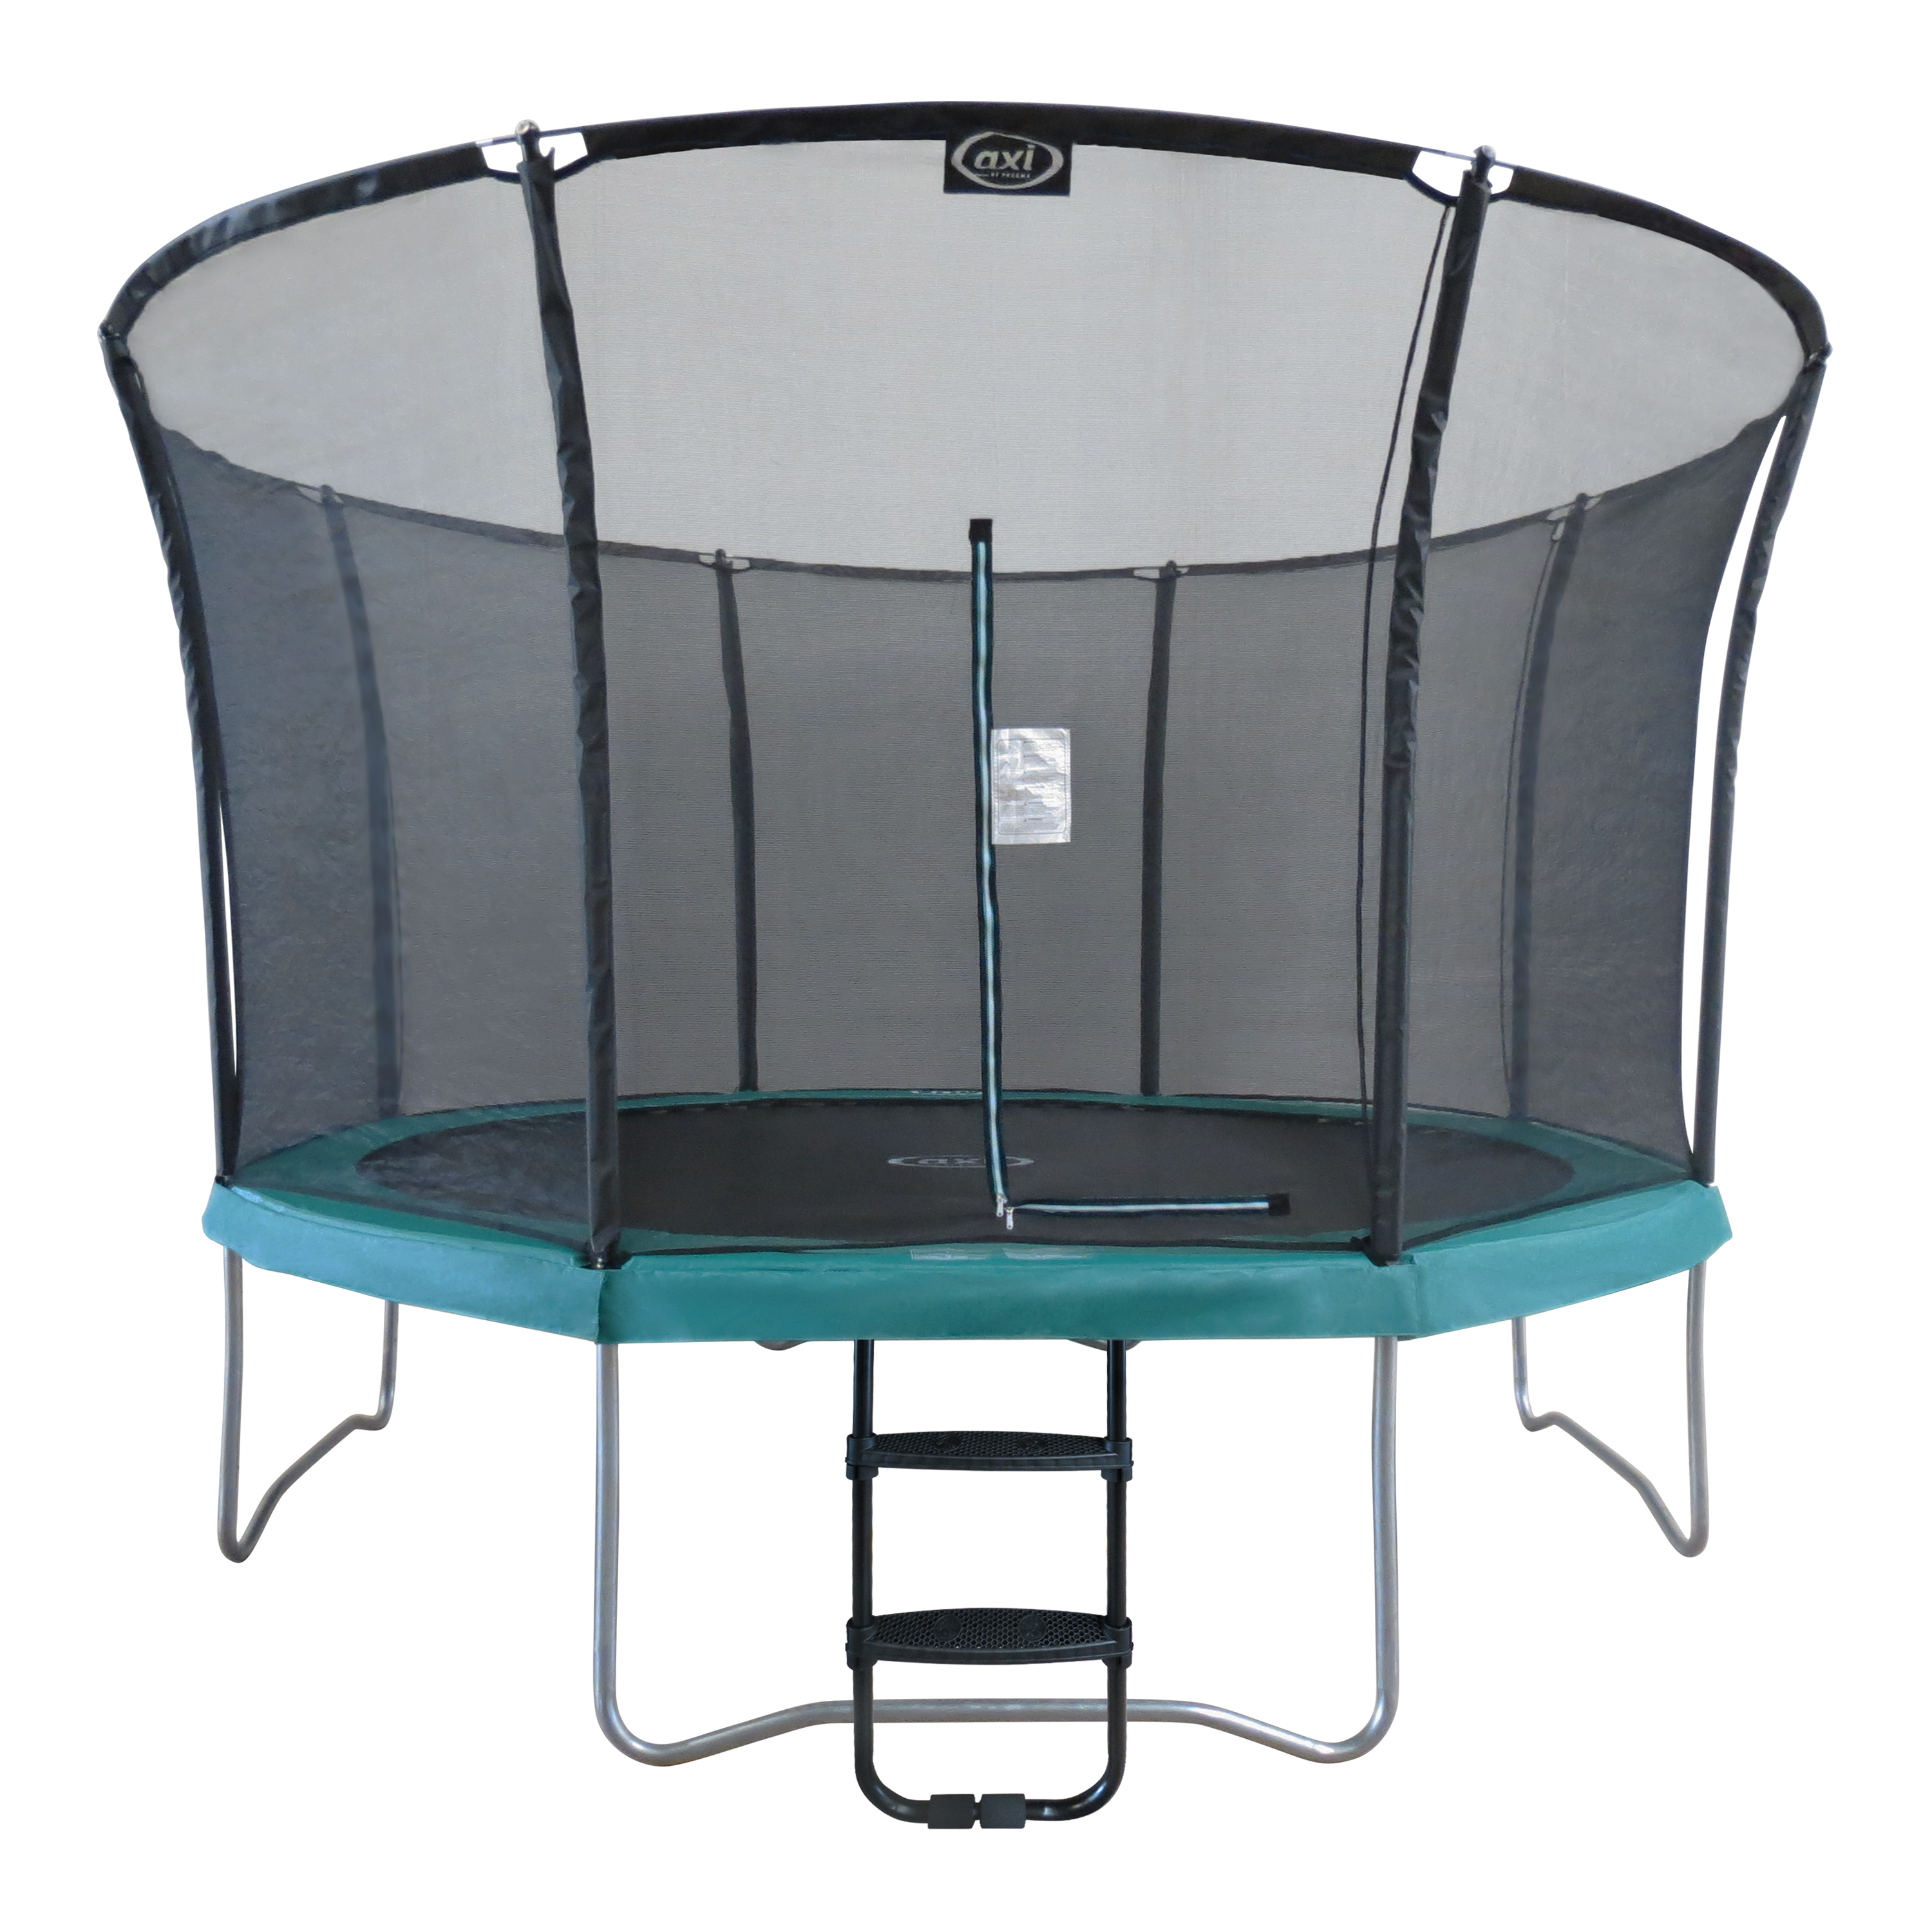 Denver Trampoline with safety net and ladder Ø 366 cm Green - Onground on poles - Round 12ft